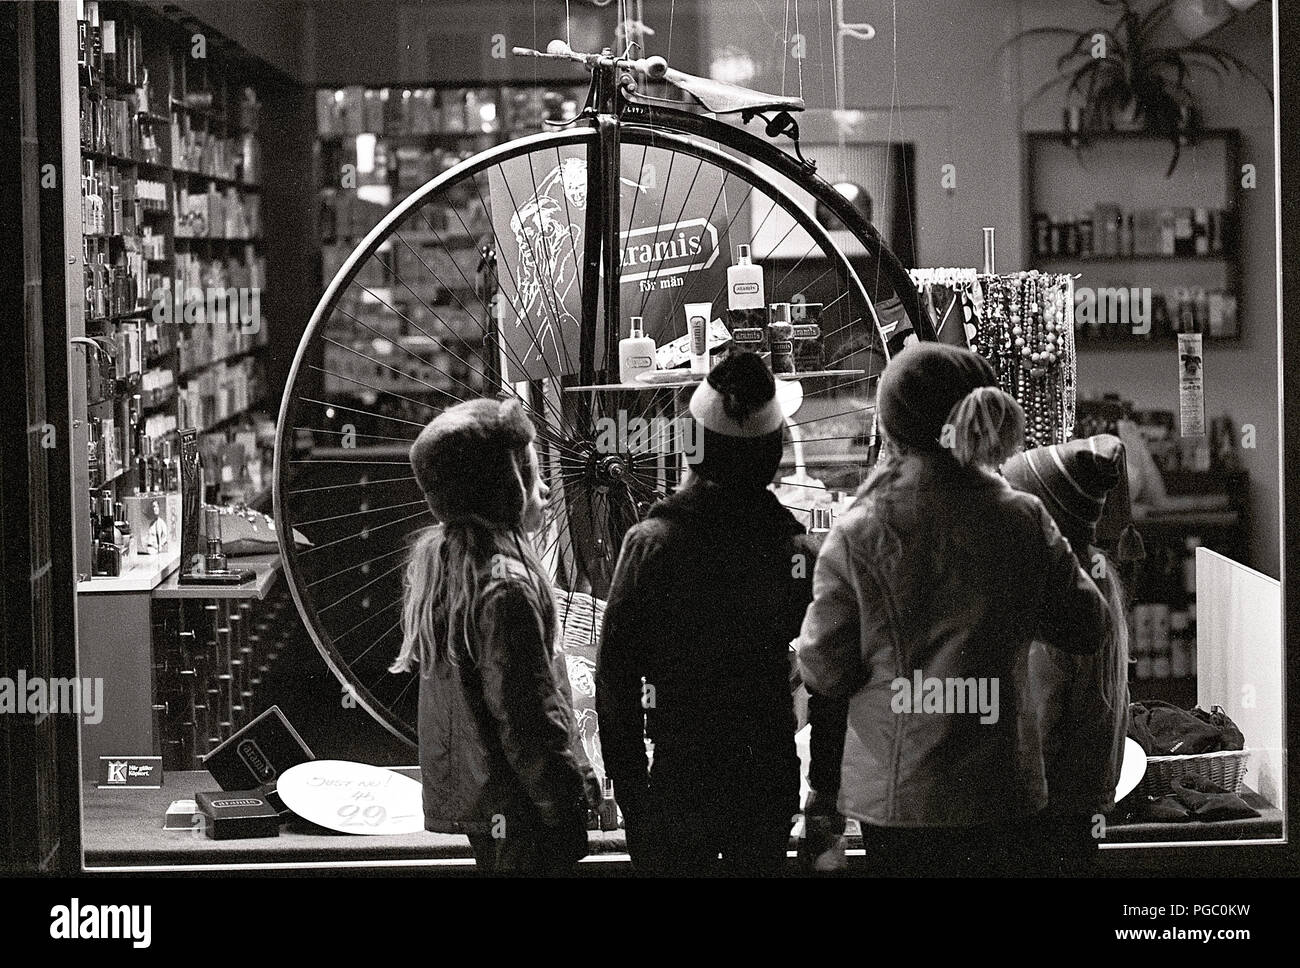 1970s store. A group of children is standing in front of a store and looking at a Penny-farthing bicycle. Sweden 1970s Stock Photo